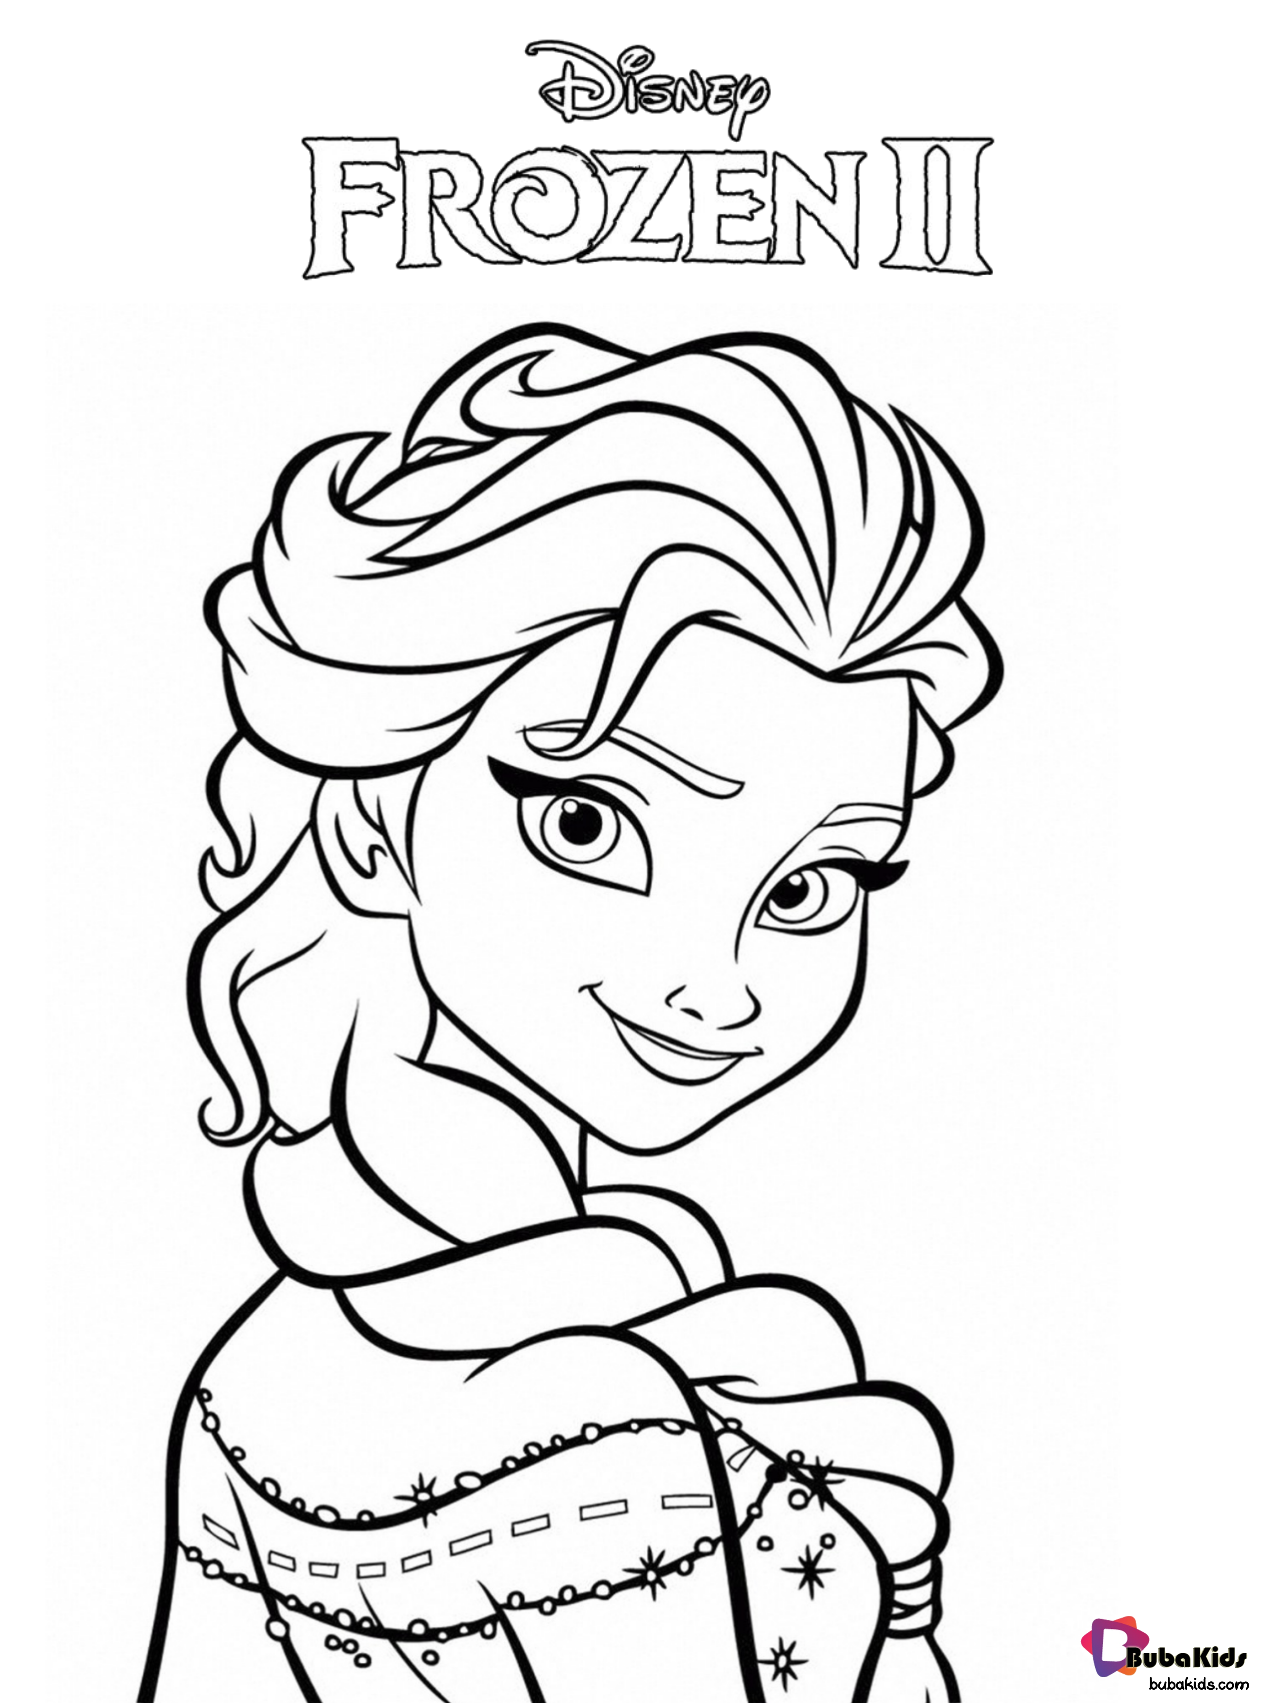 Free download and printable Frozen 2 coloring page. Wallpaper